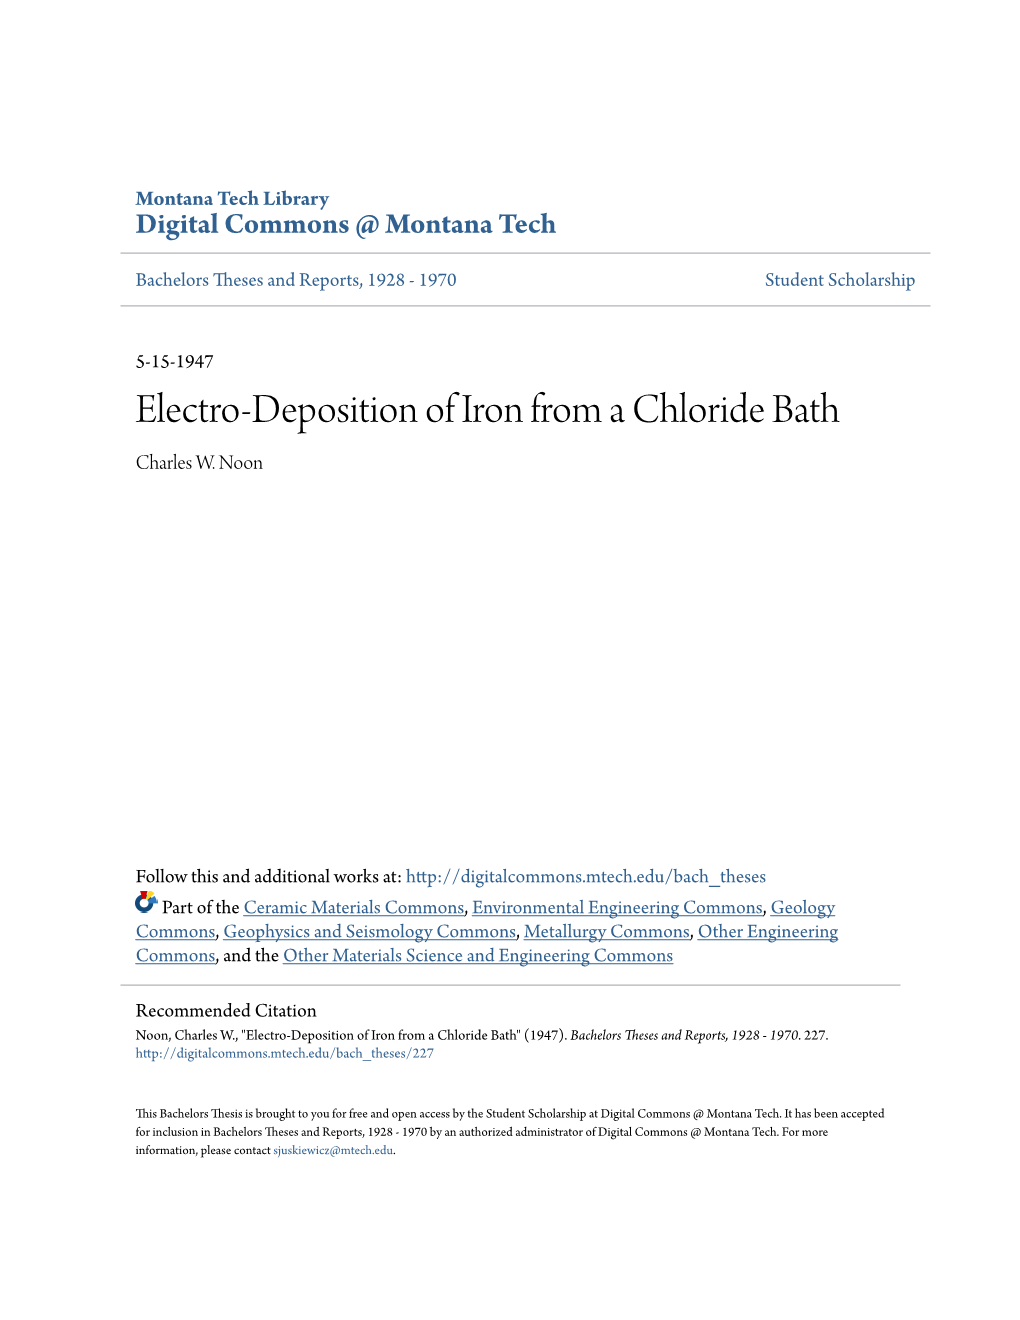 Electro-Deposition of Iron from a Chloride Bath Charles W